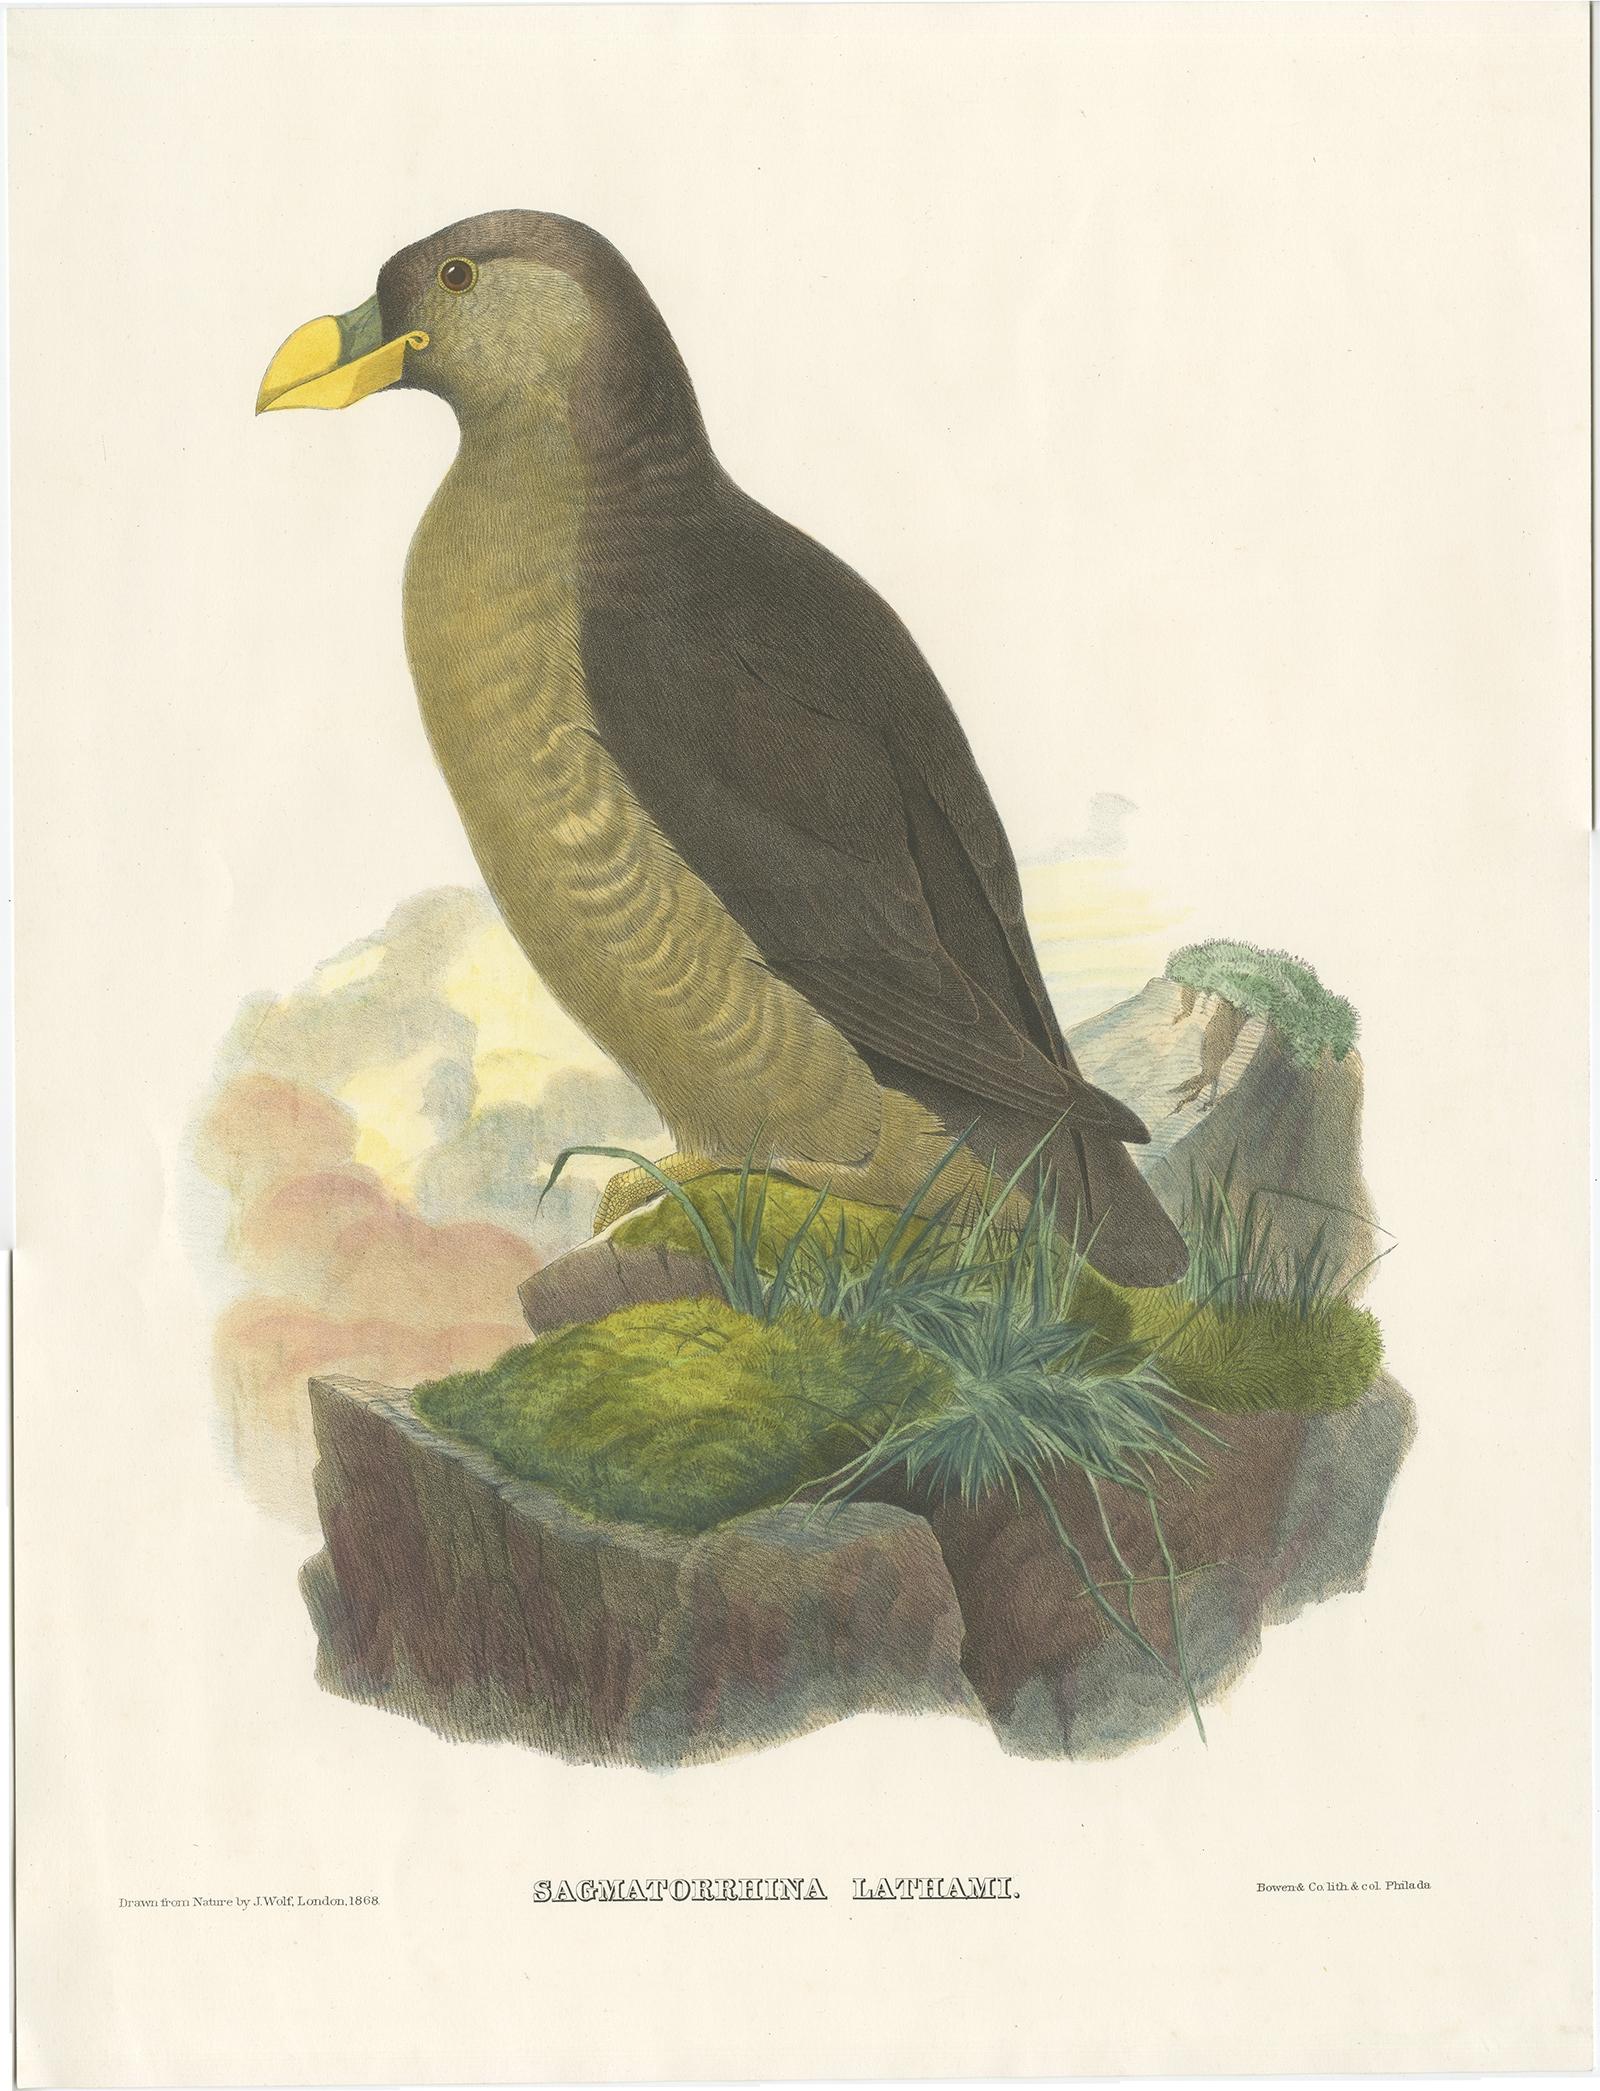 Antique bird print titled 'Sagmatorrhina Lathami'. 

Old bird print depicting Latham's Guillemot. This print originates from 'The new and heretofore unfigured species of the birds of North America', published 1866-1869.

This spectacular large